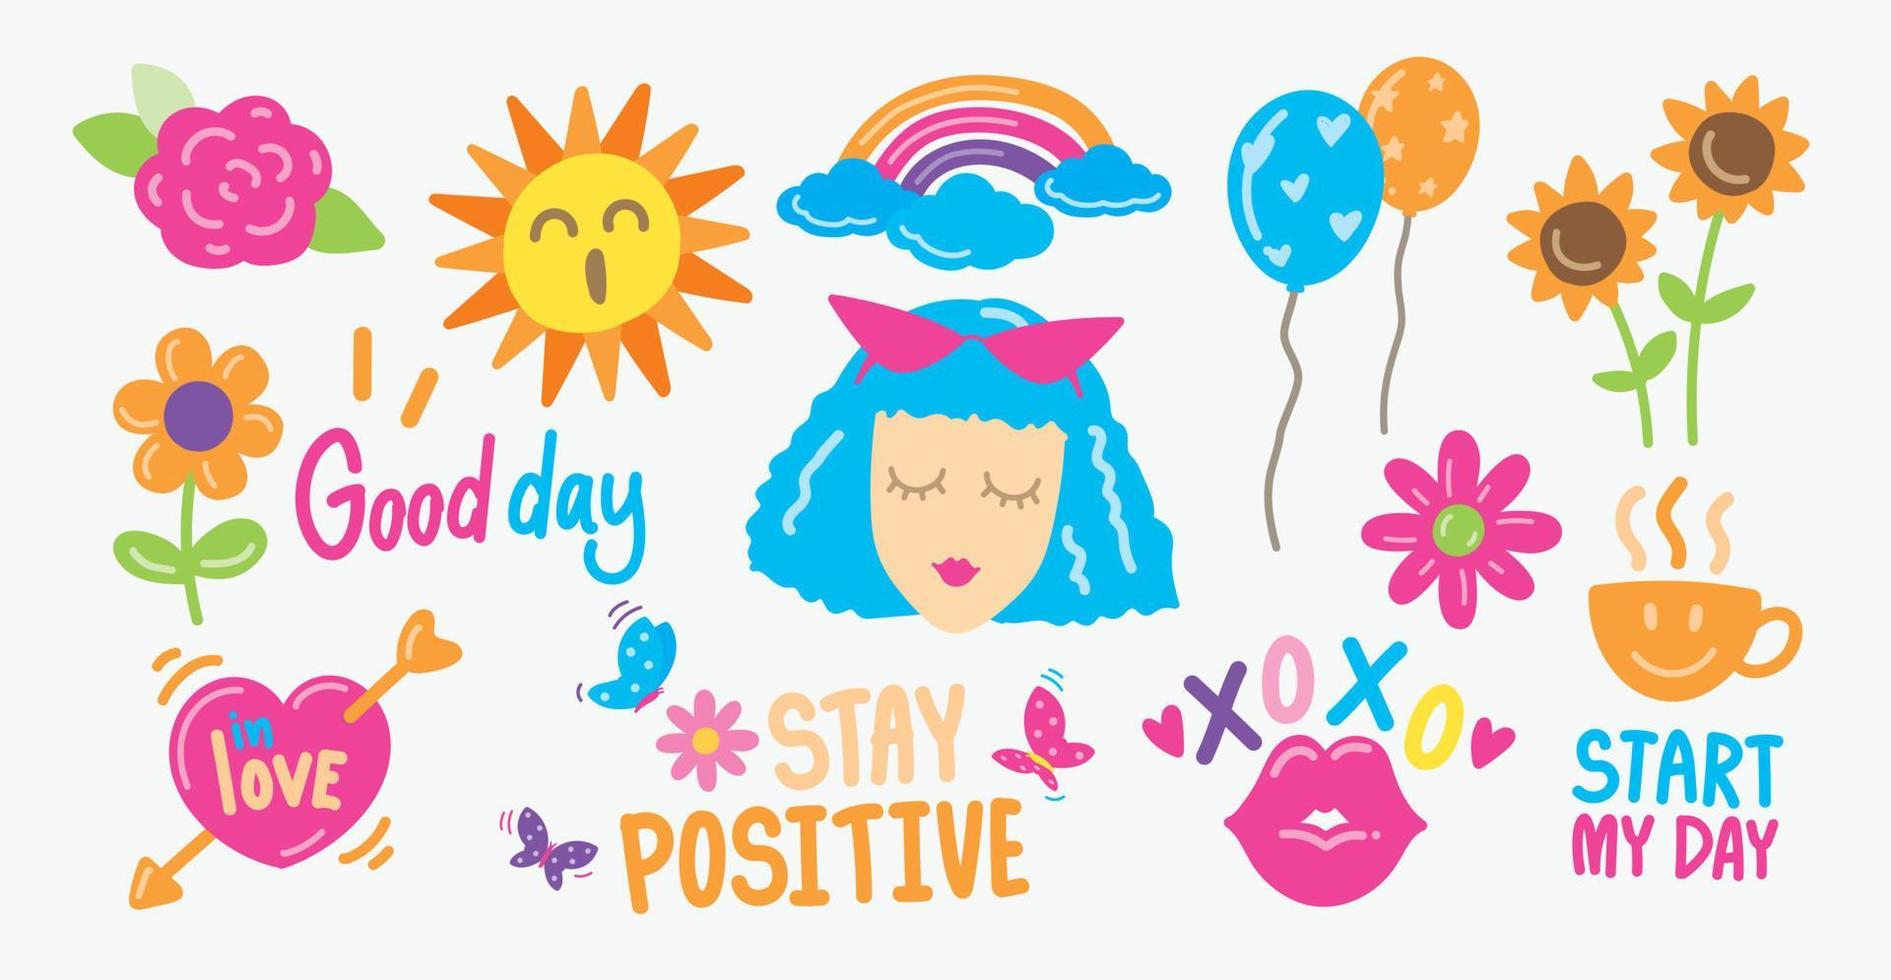 Girly hand drawn stickers vector set with positive words.